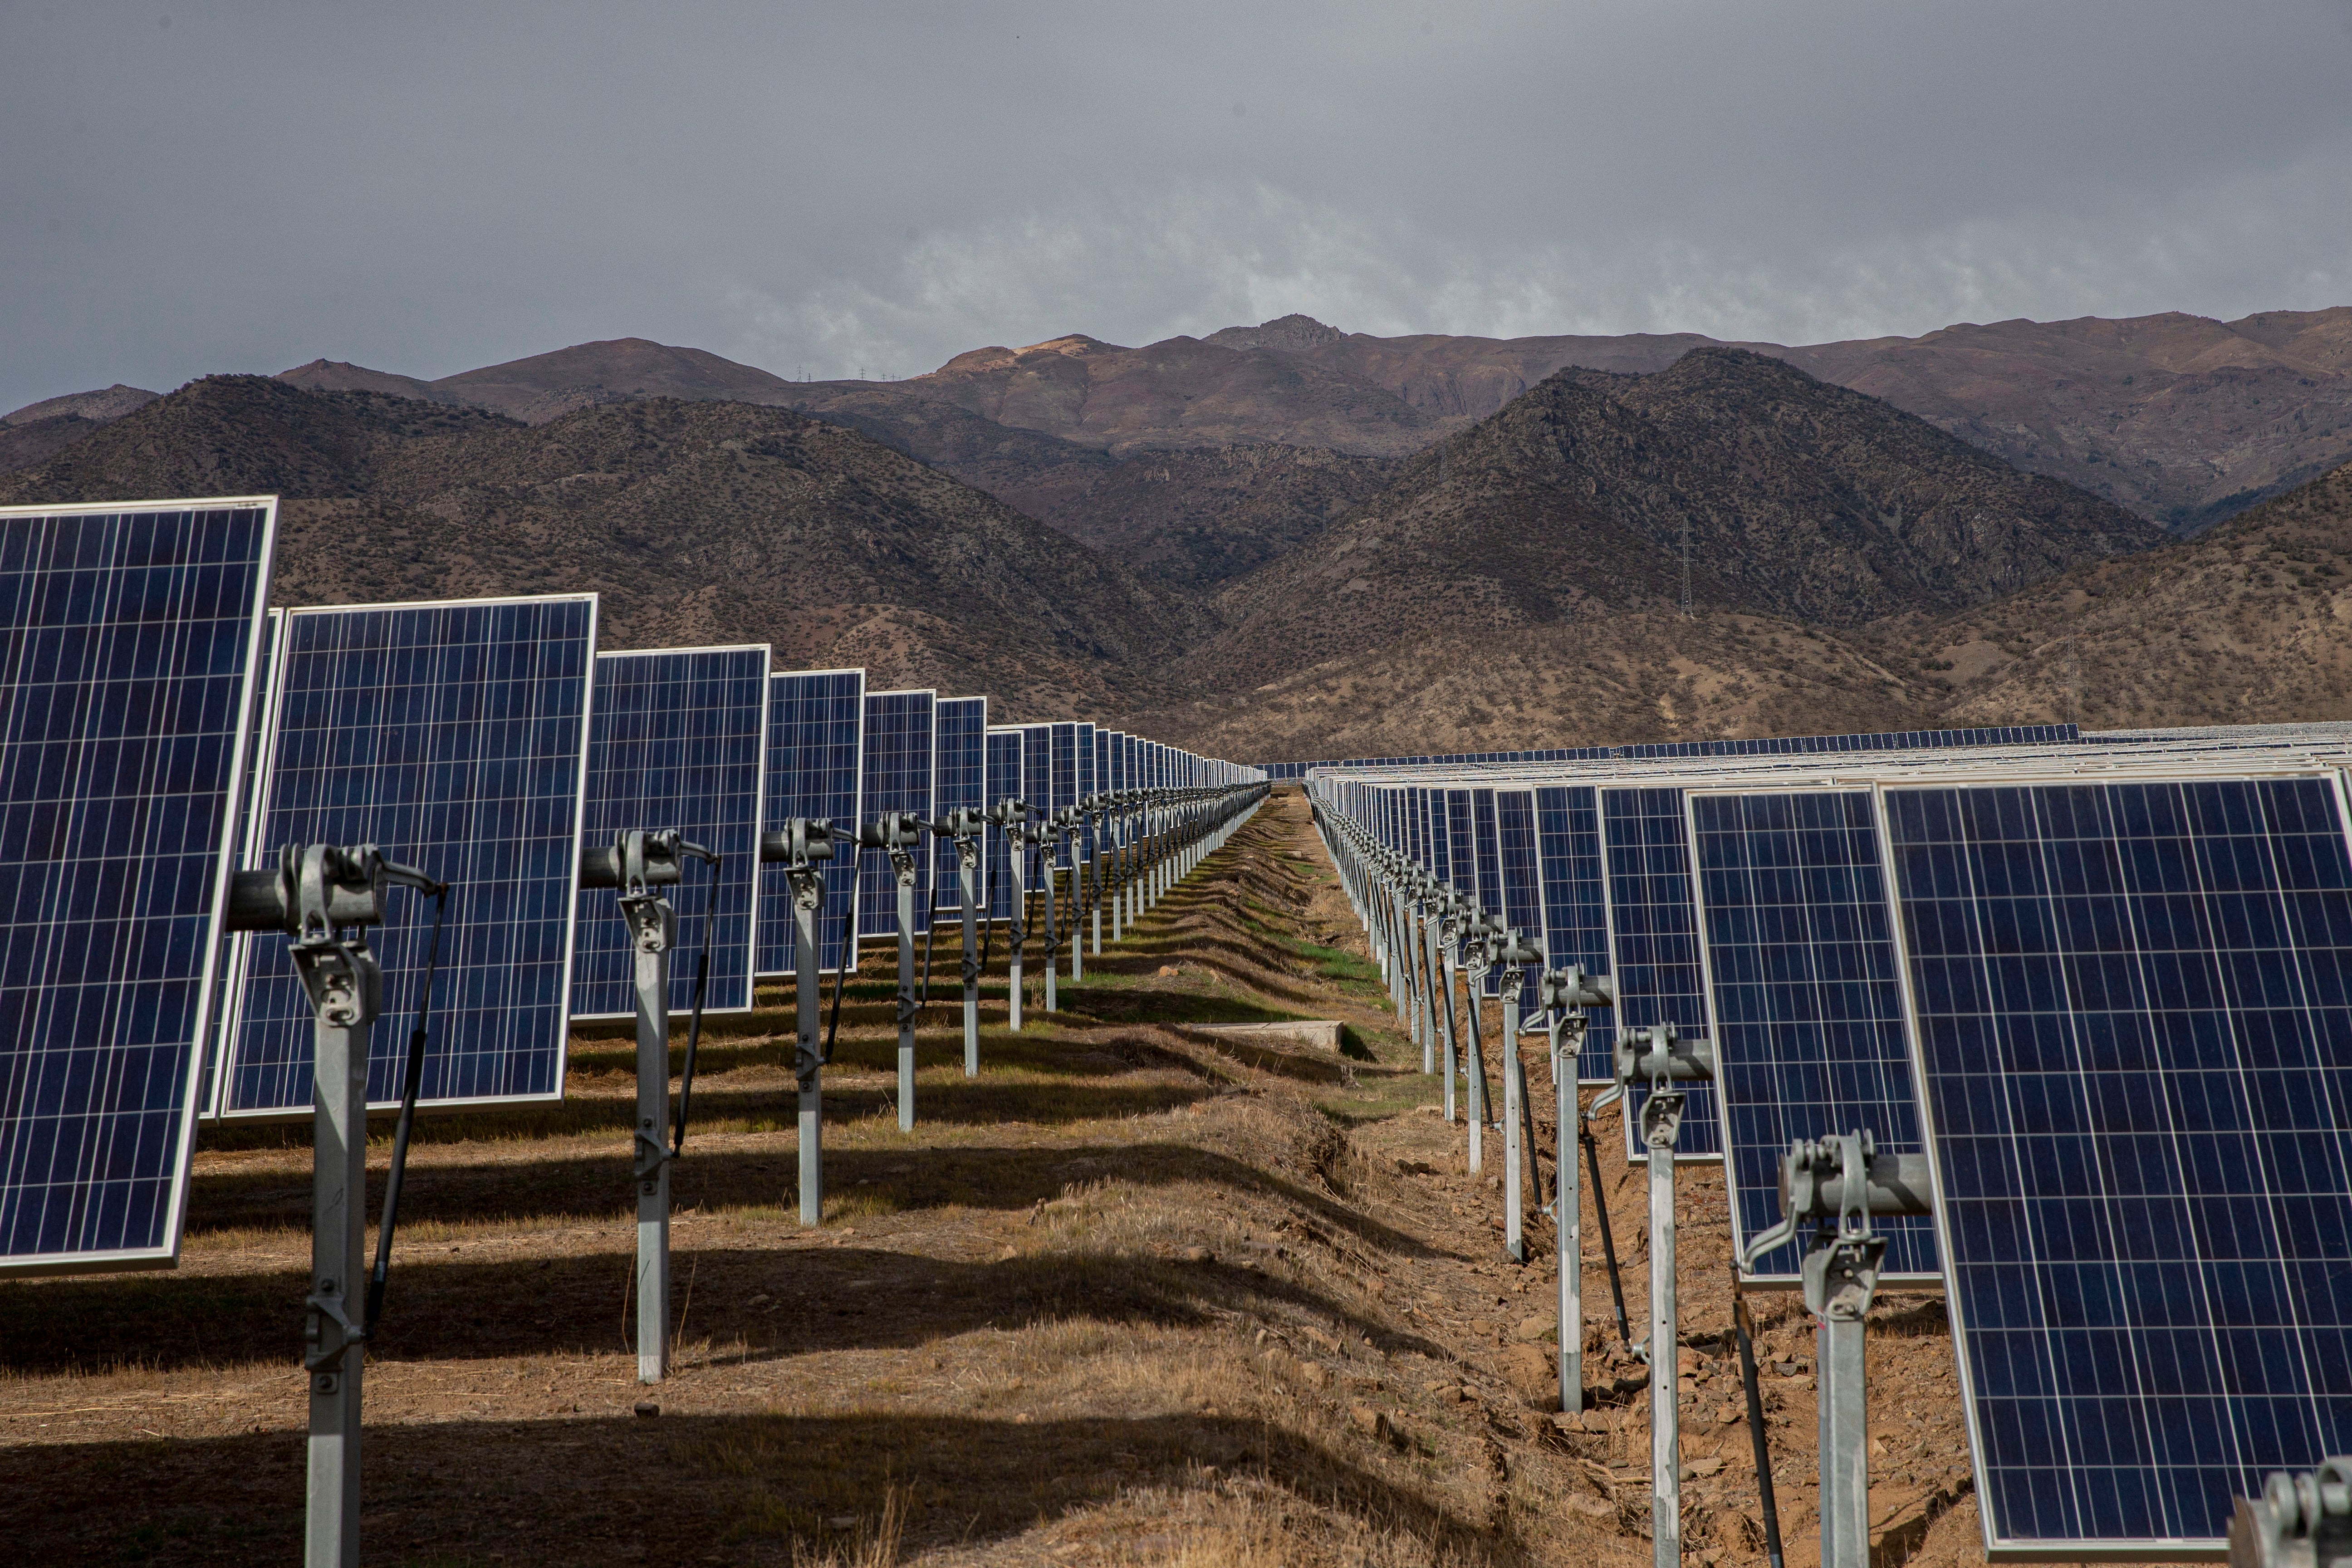 Solar panels stand in the Quilapilún solar energy plant, a joint venture by Chile and China, in Colina, Chile